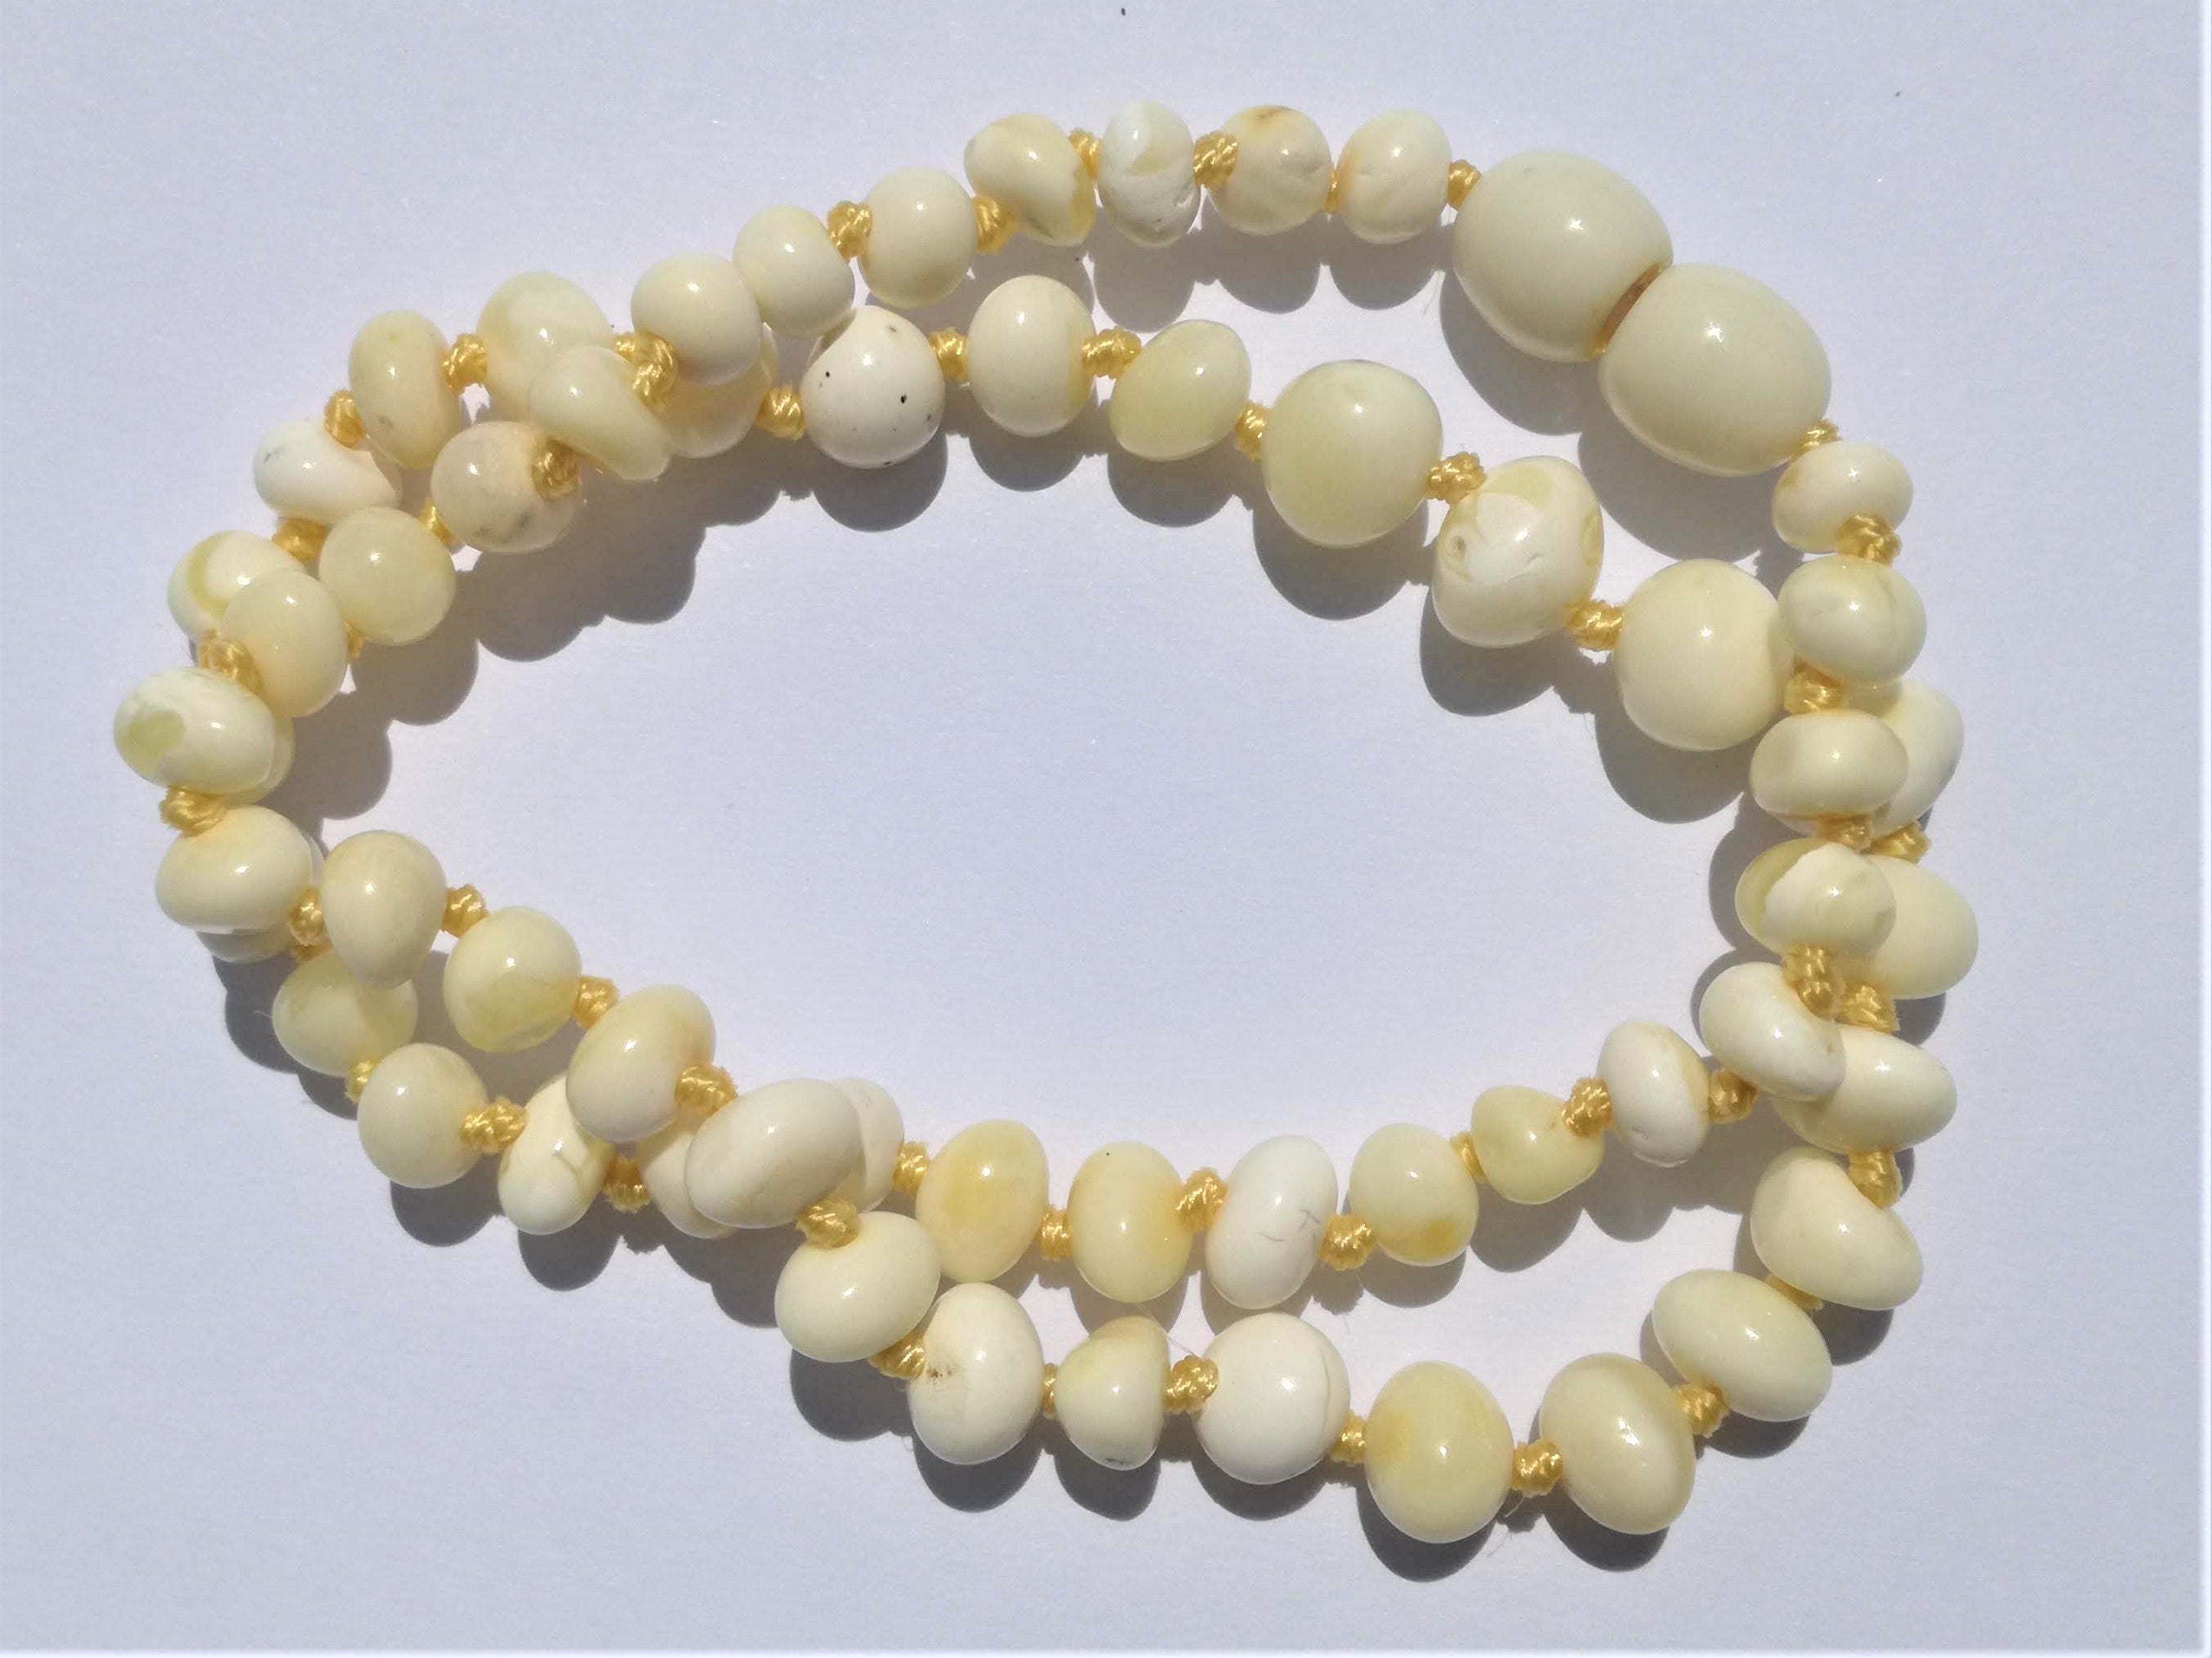 amber teething necklace, white polished beads,  premium product, limited edition, plastic screw clasp, healing, succinic acid, genuine baltic amber, safe for babies and nursing mums, made in poland